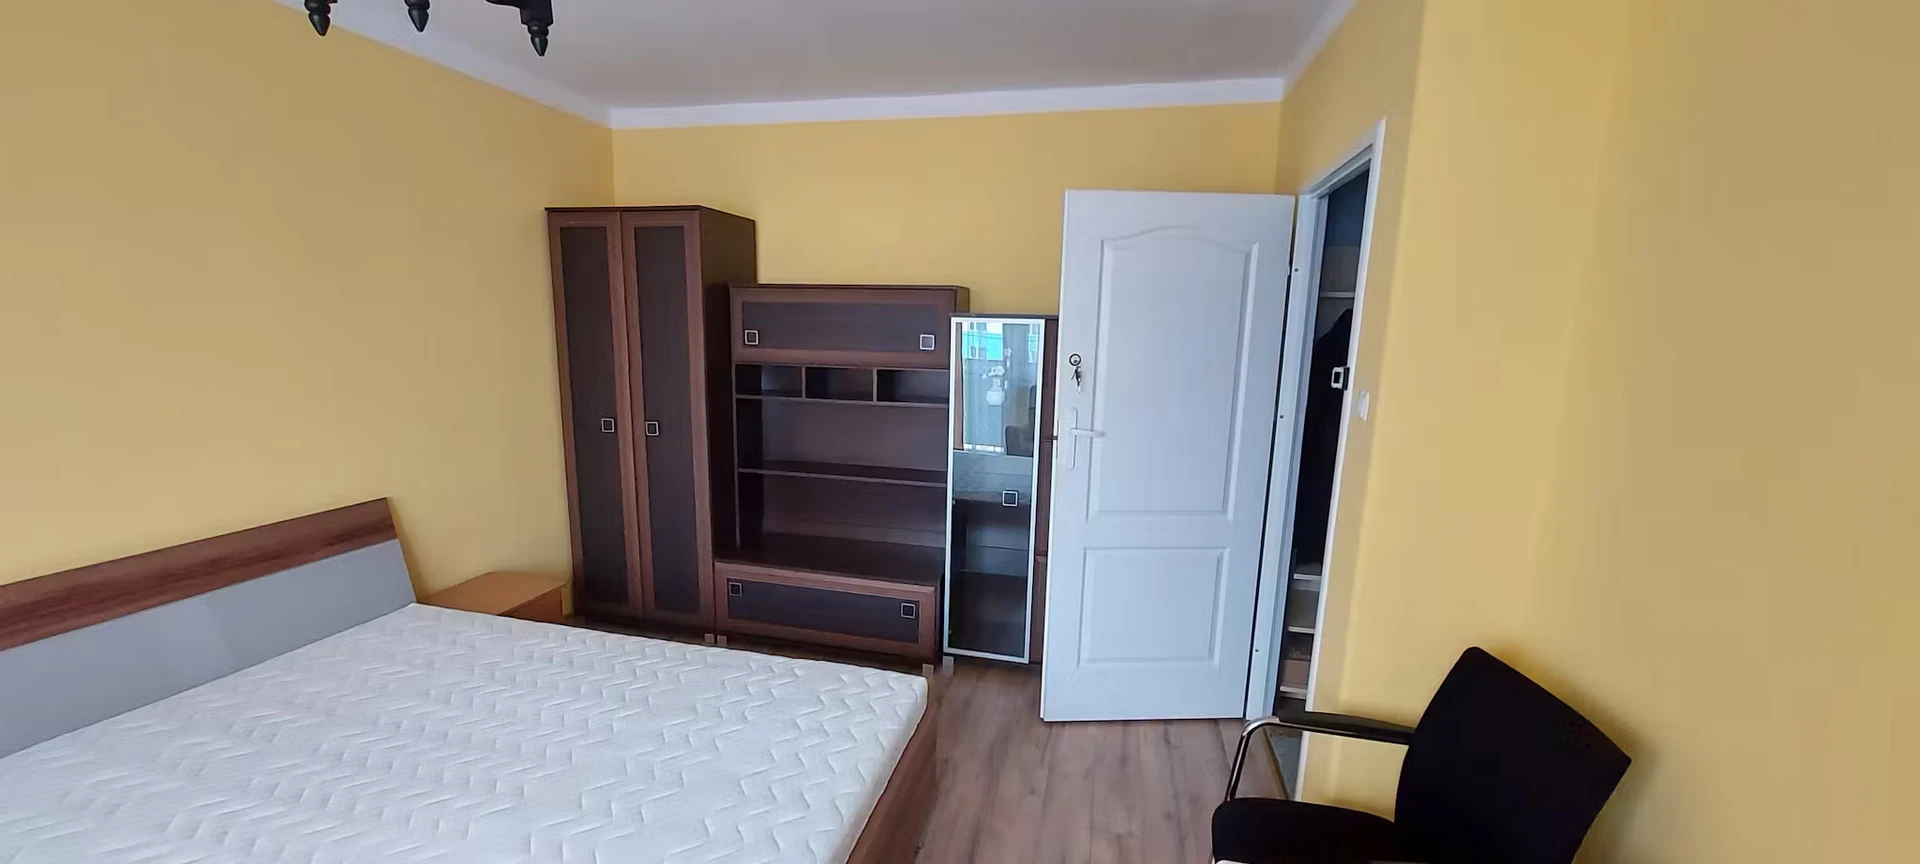 Renting rooms by the month in Rzeszów